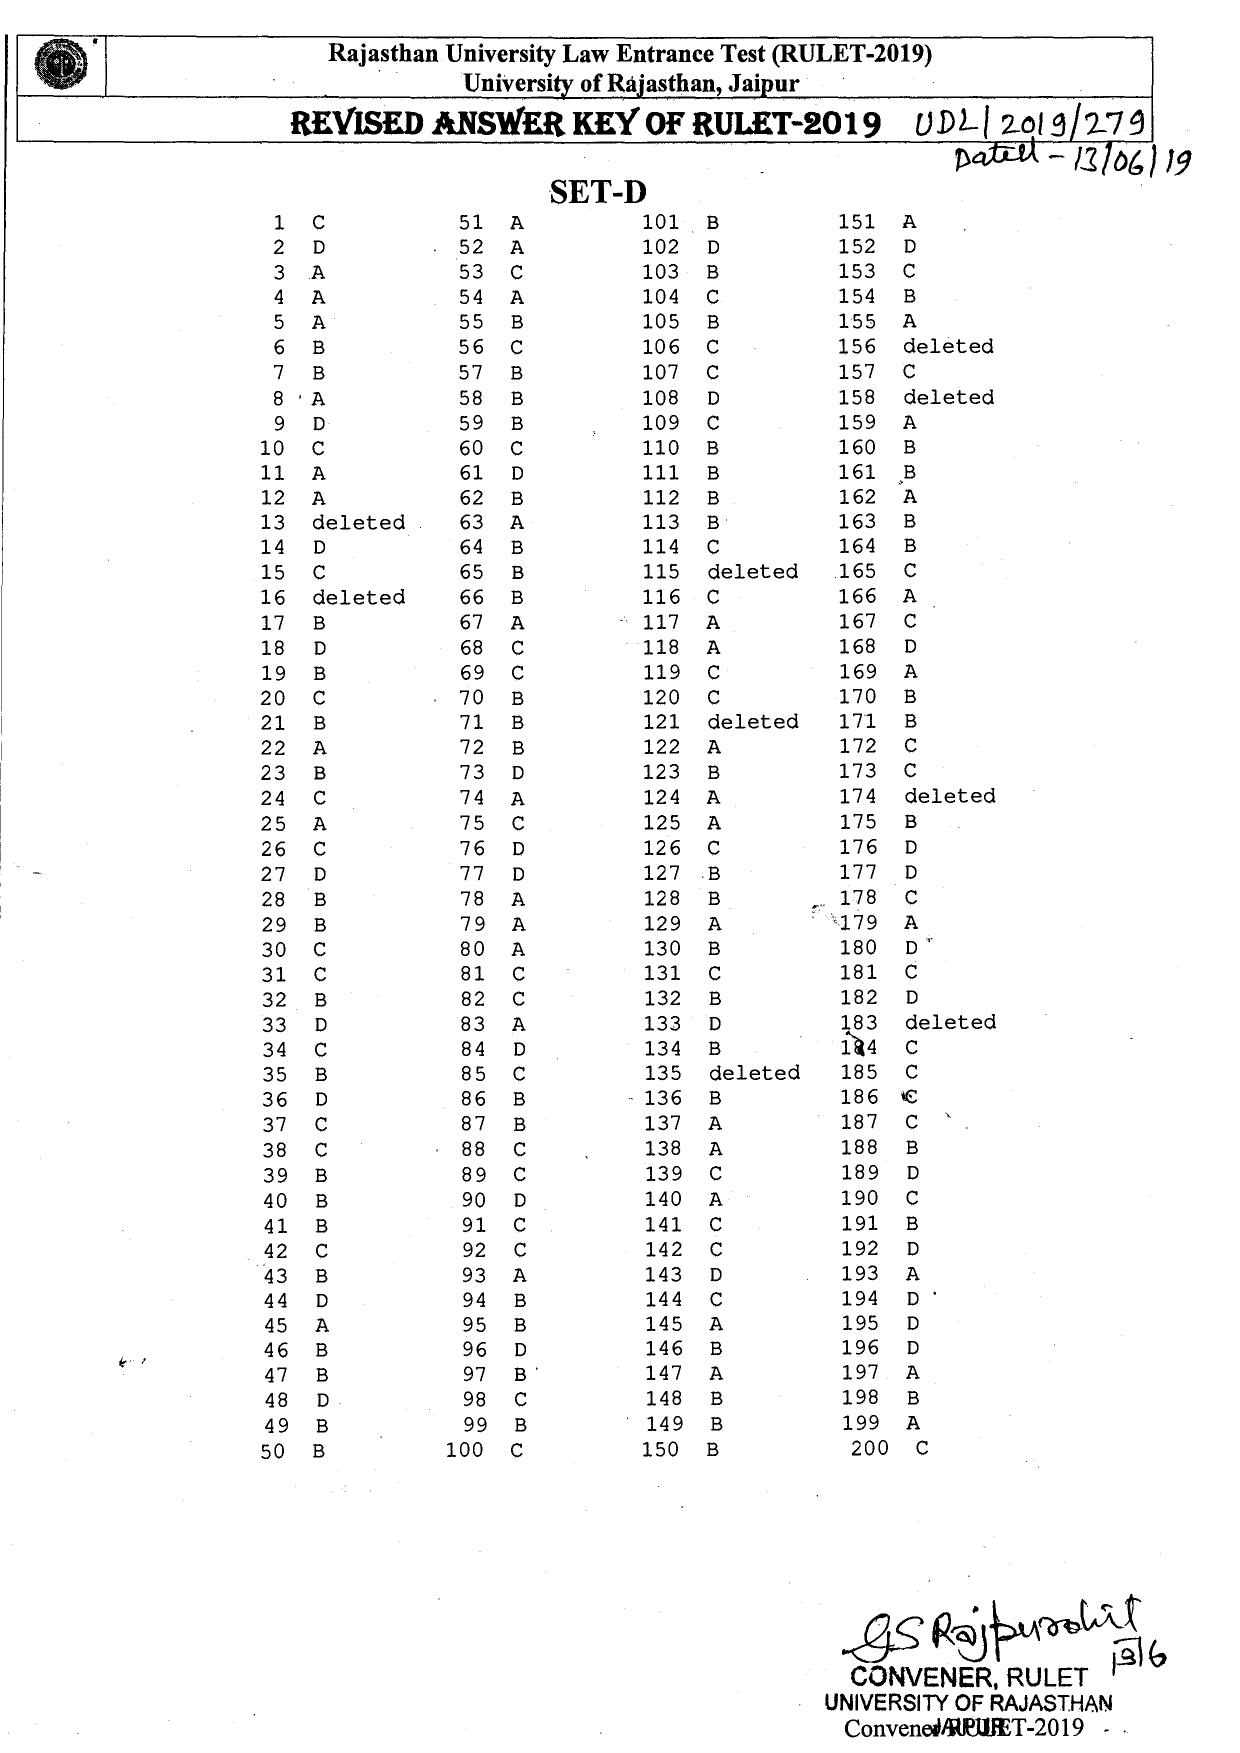 RULET 2019 Answer Key - Page 4